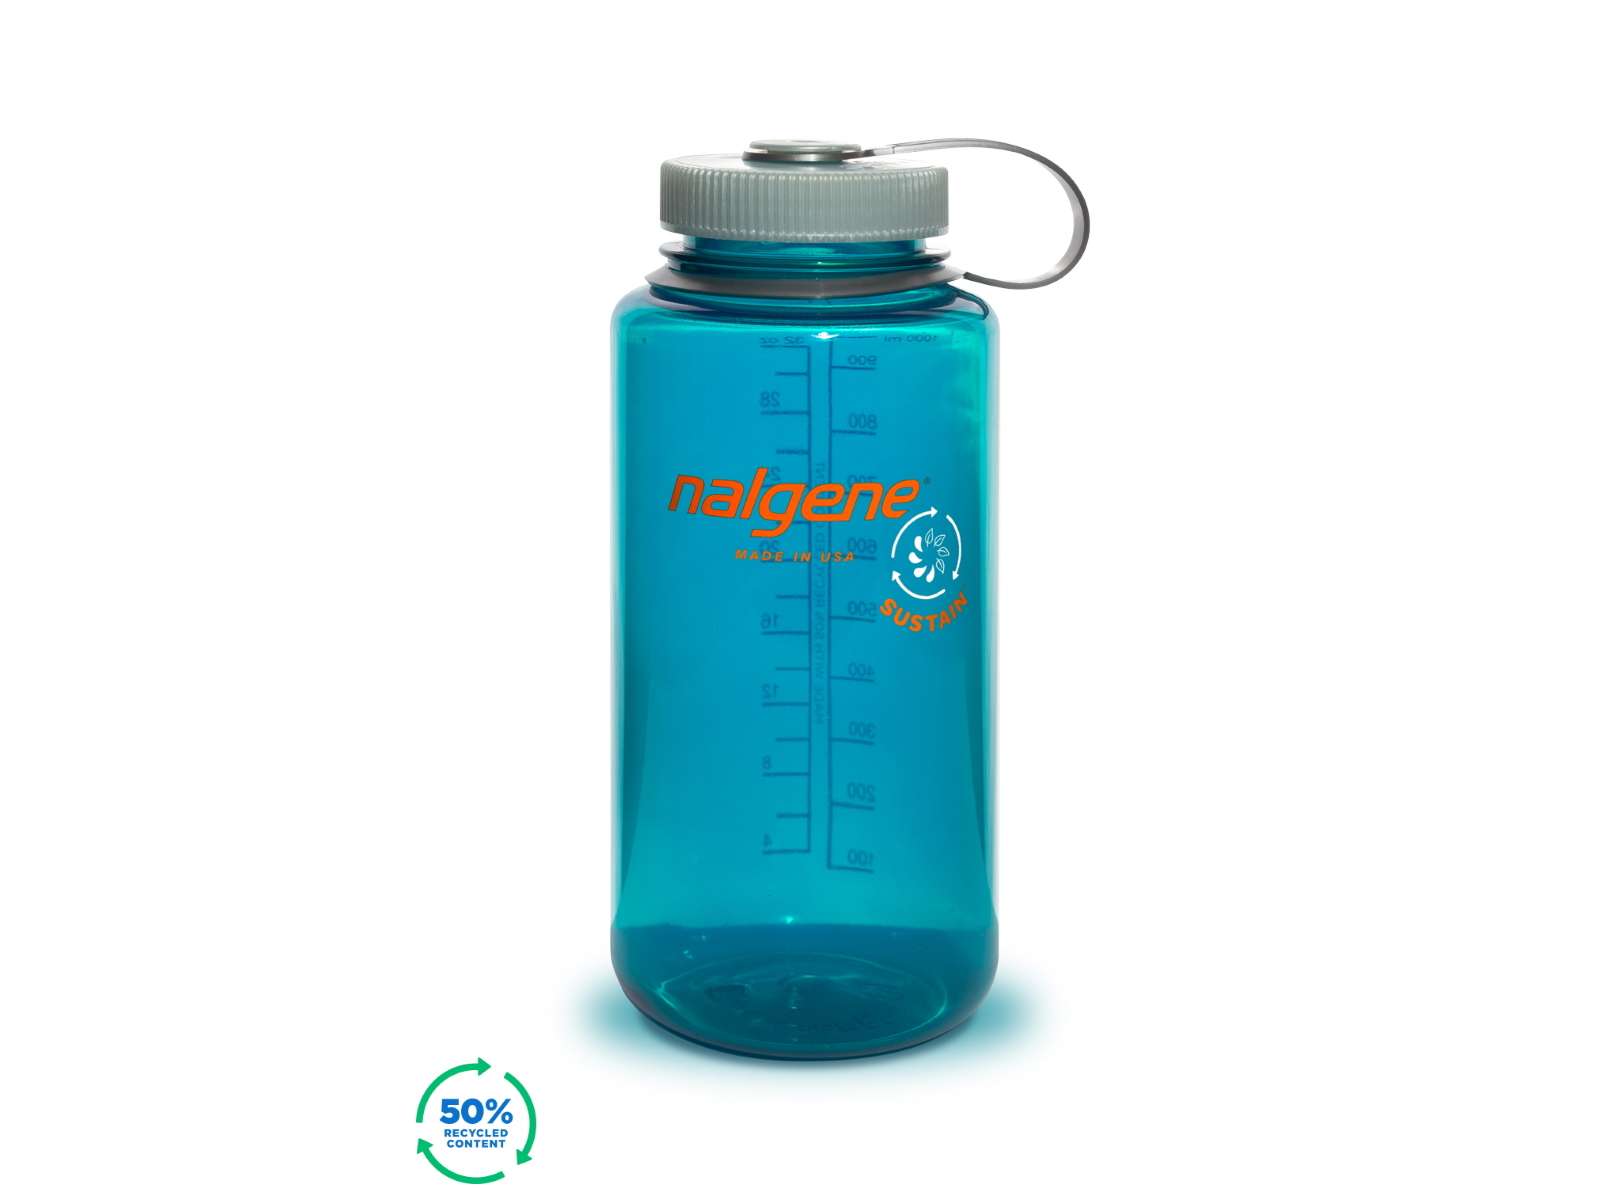 Nalgene Sustain Wide Mouth Bottle in Trout or Teal